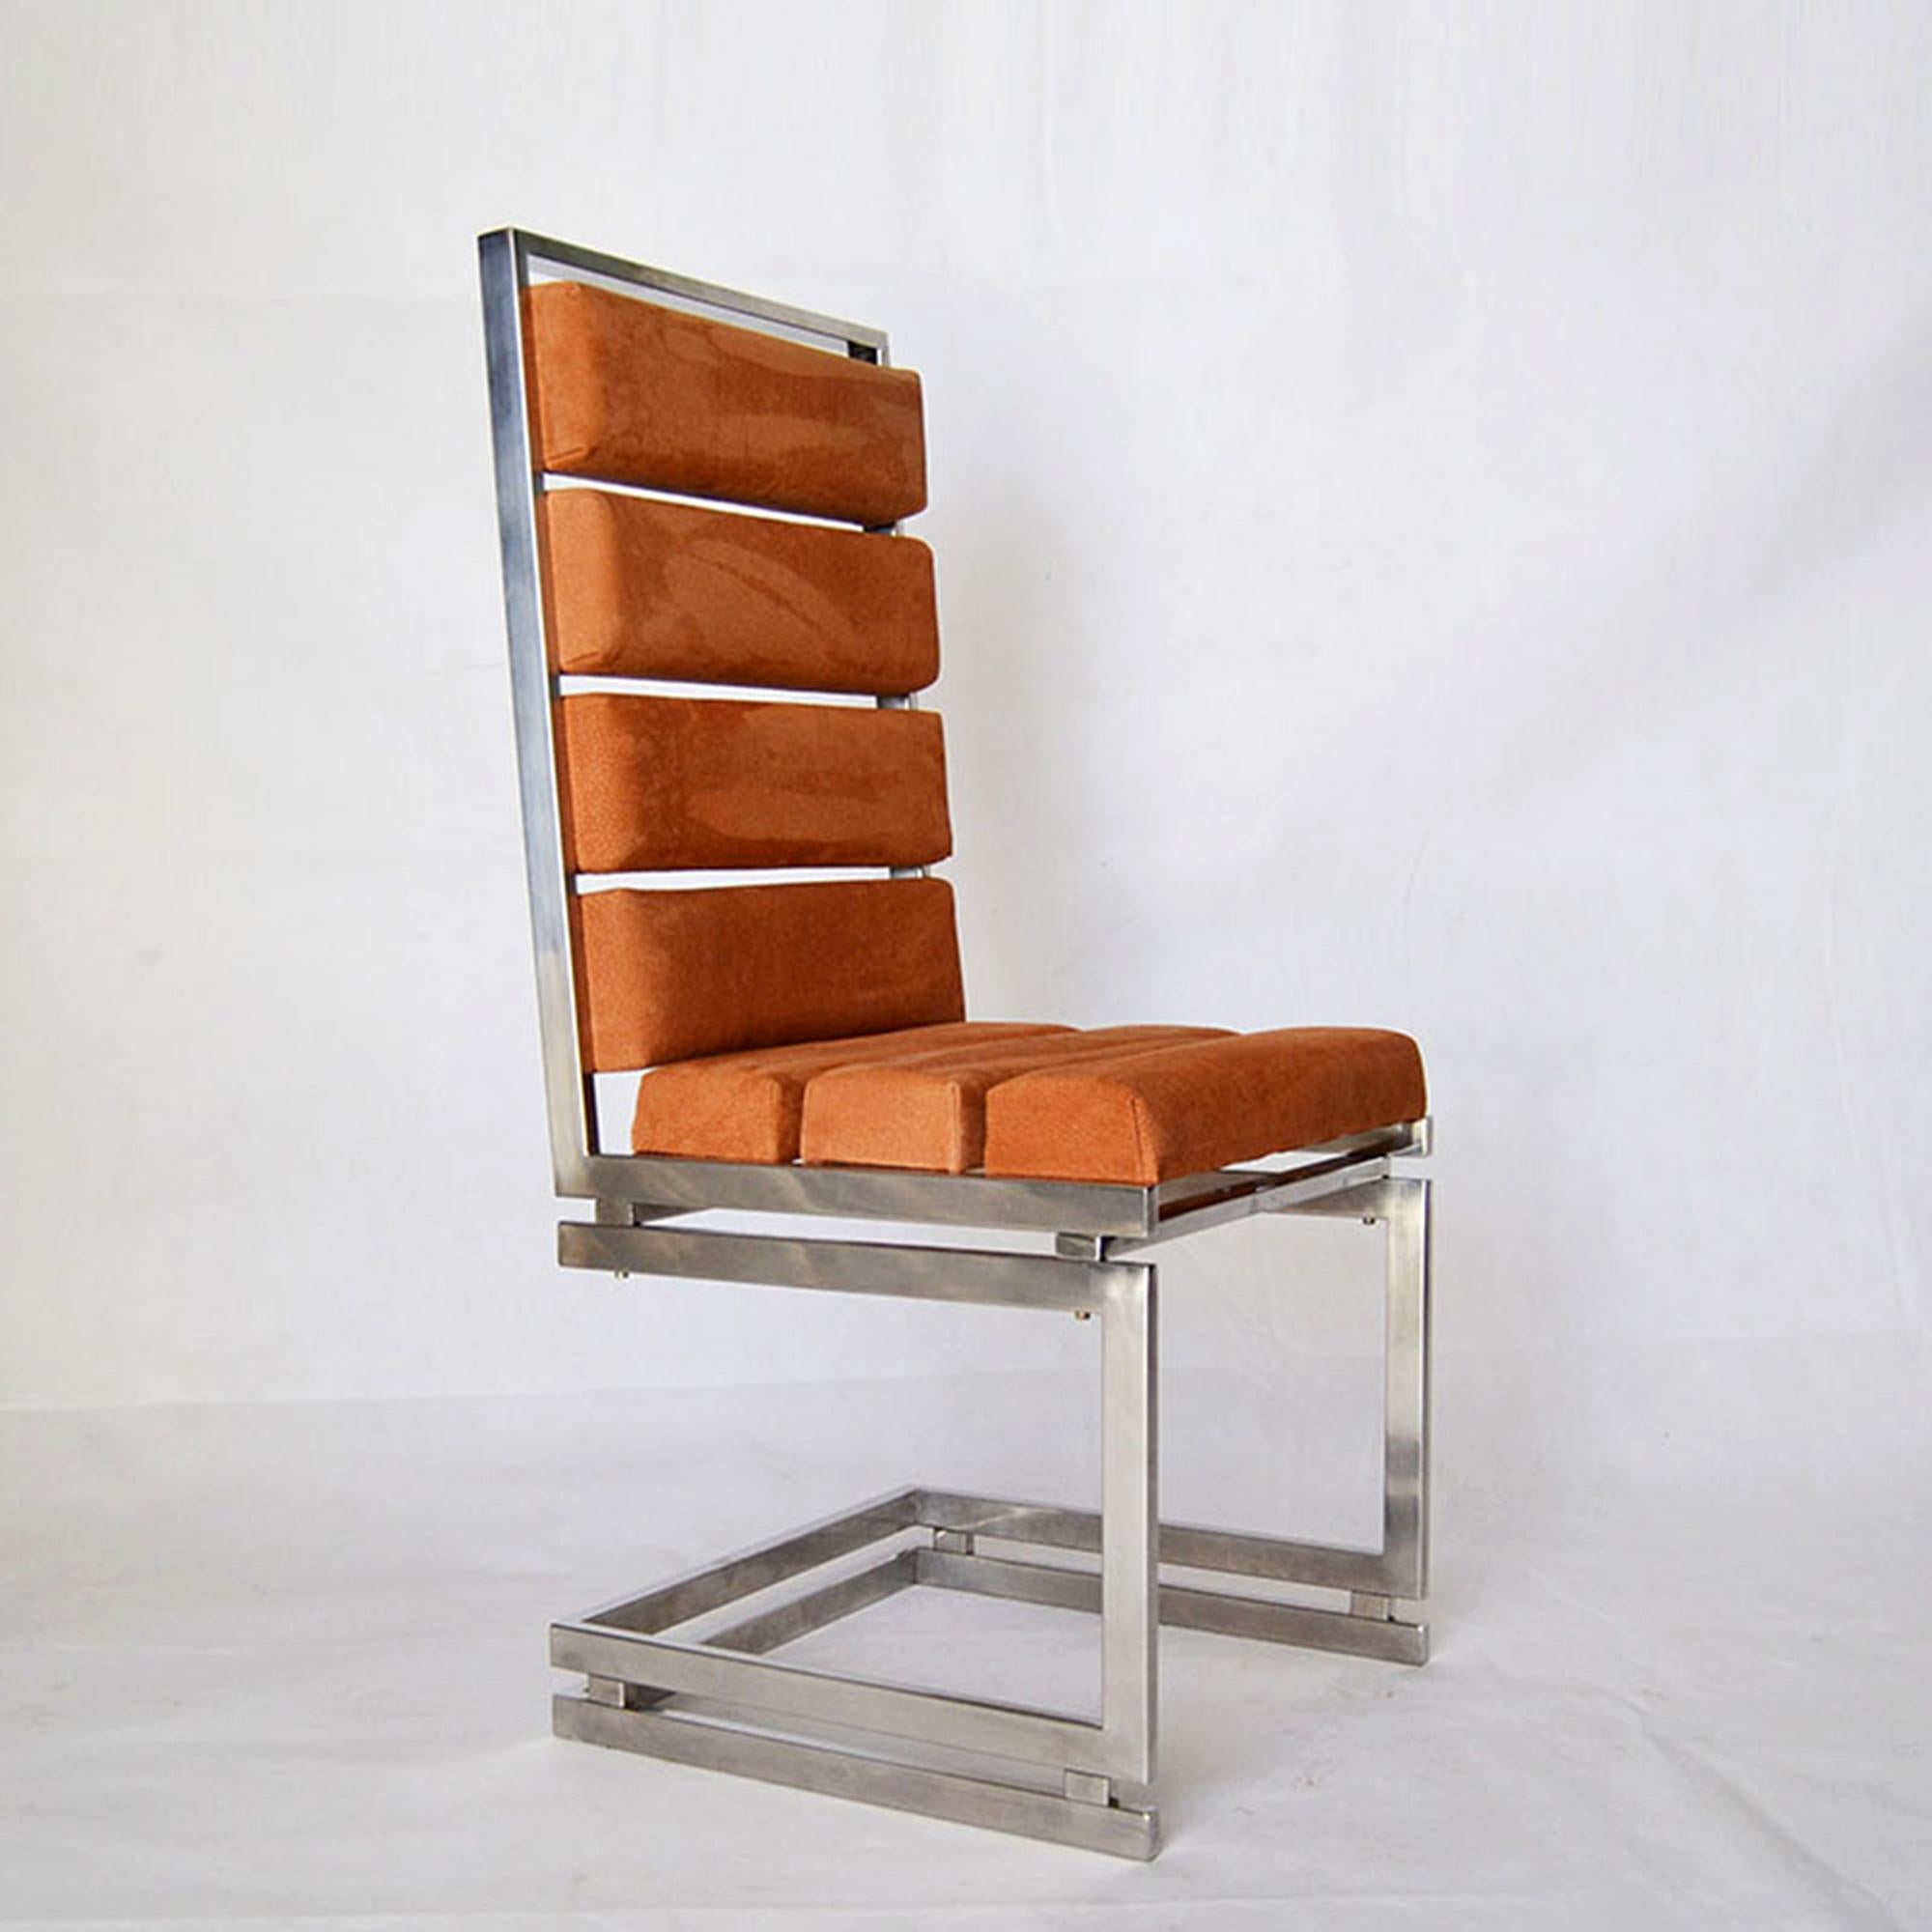 Set of eight Romeo Rega chairs in steel and pekari leather
Furniture designed by Romeo Rega, Italy
Year 1972, Italy
Good vintage condition
Documentation: attached certificate of authenticity
Italian designer Romeo Rega was born in 1904 and is